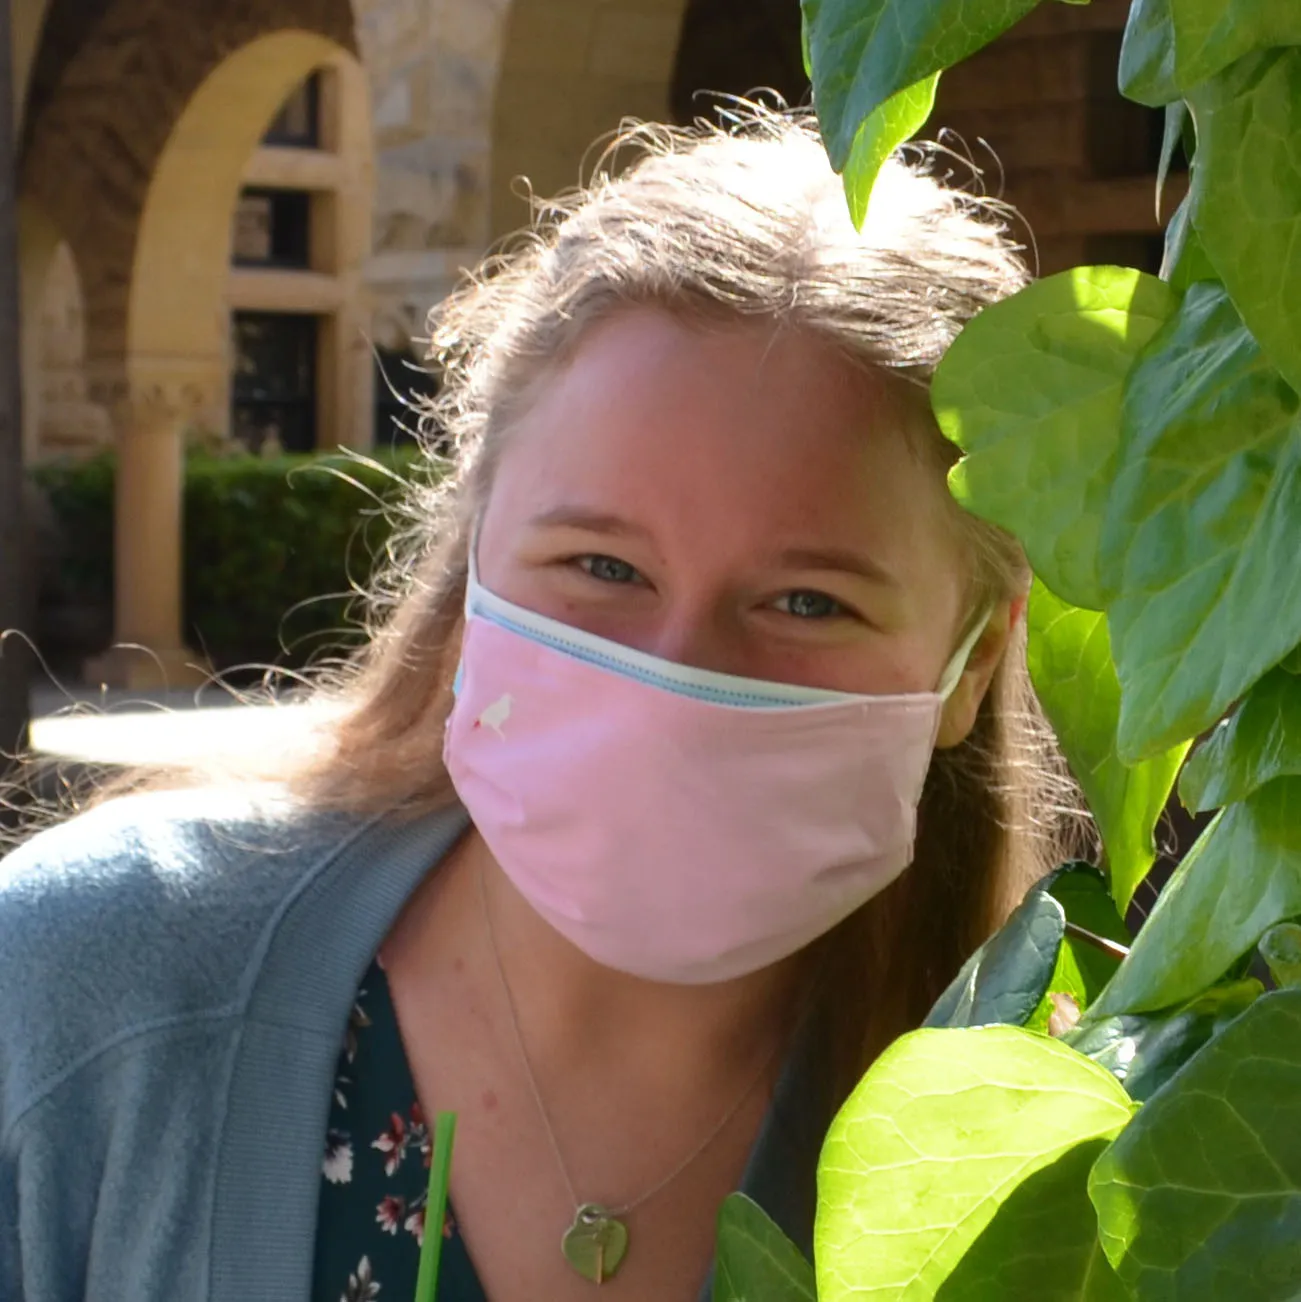 Stanford's pandemic, one year later